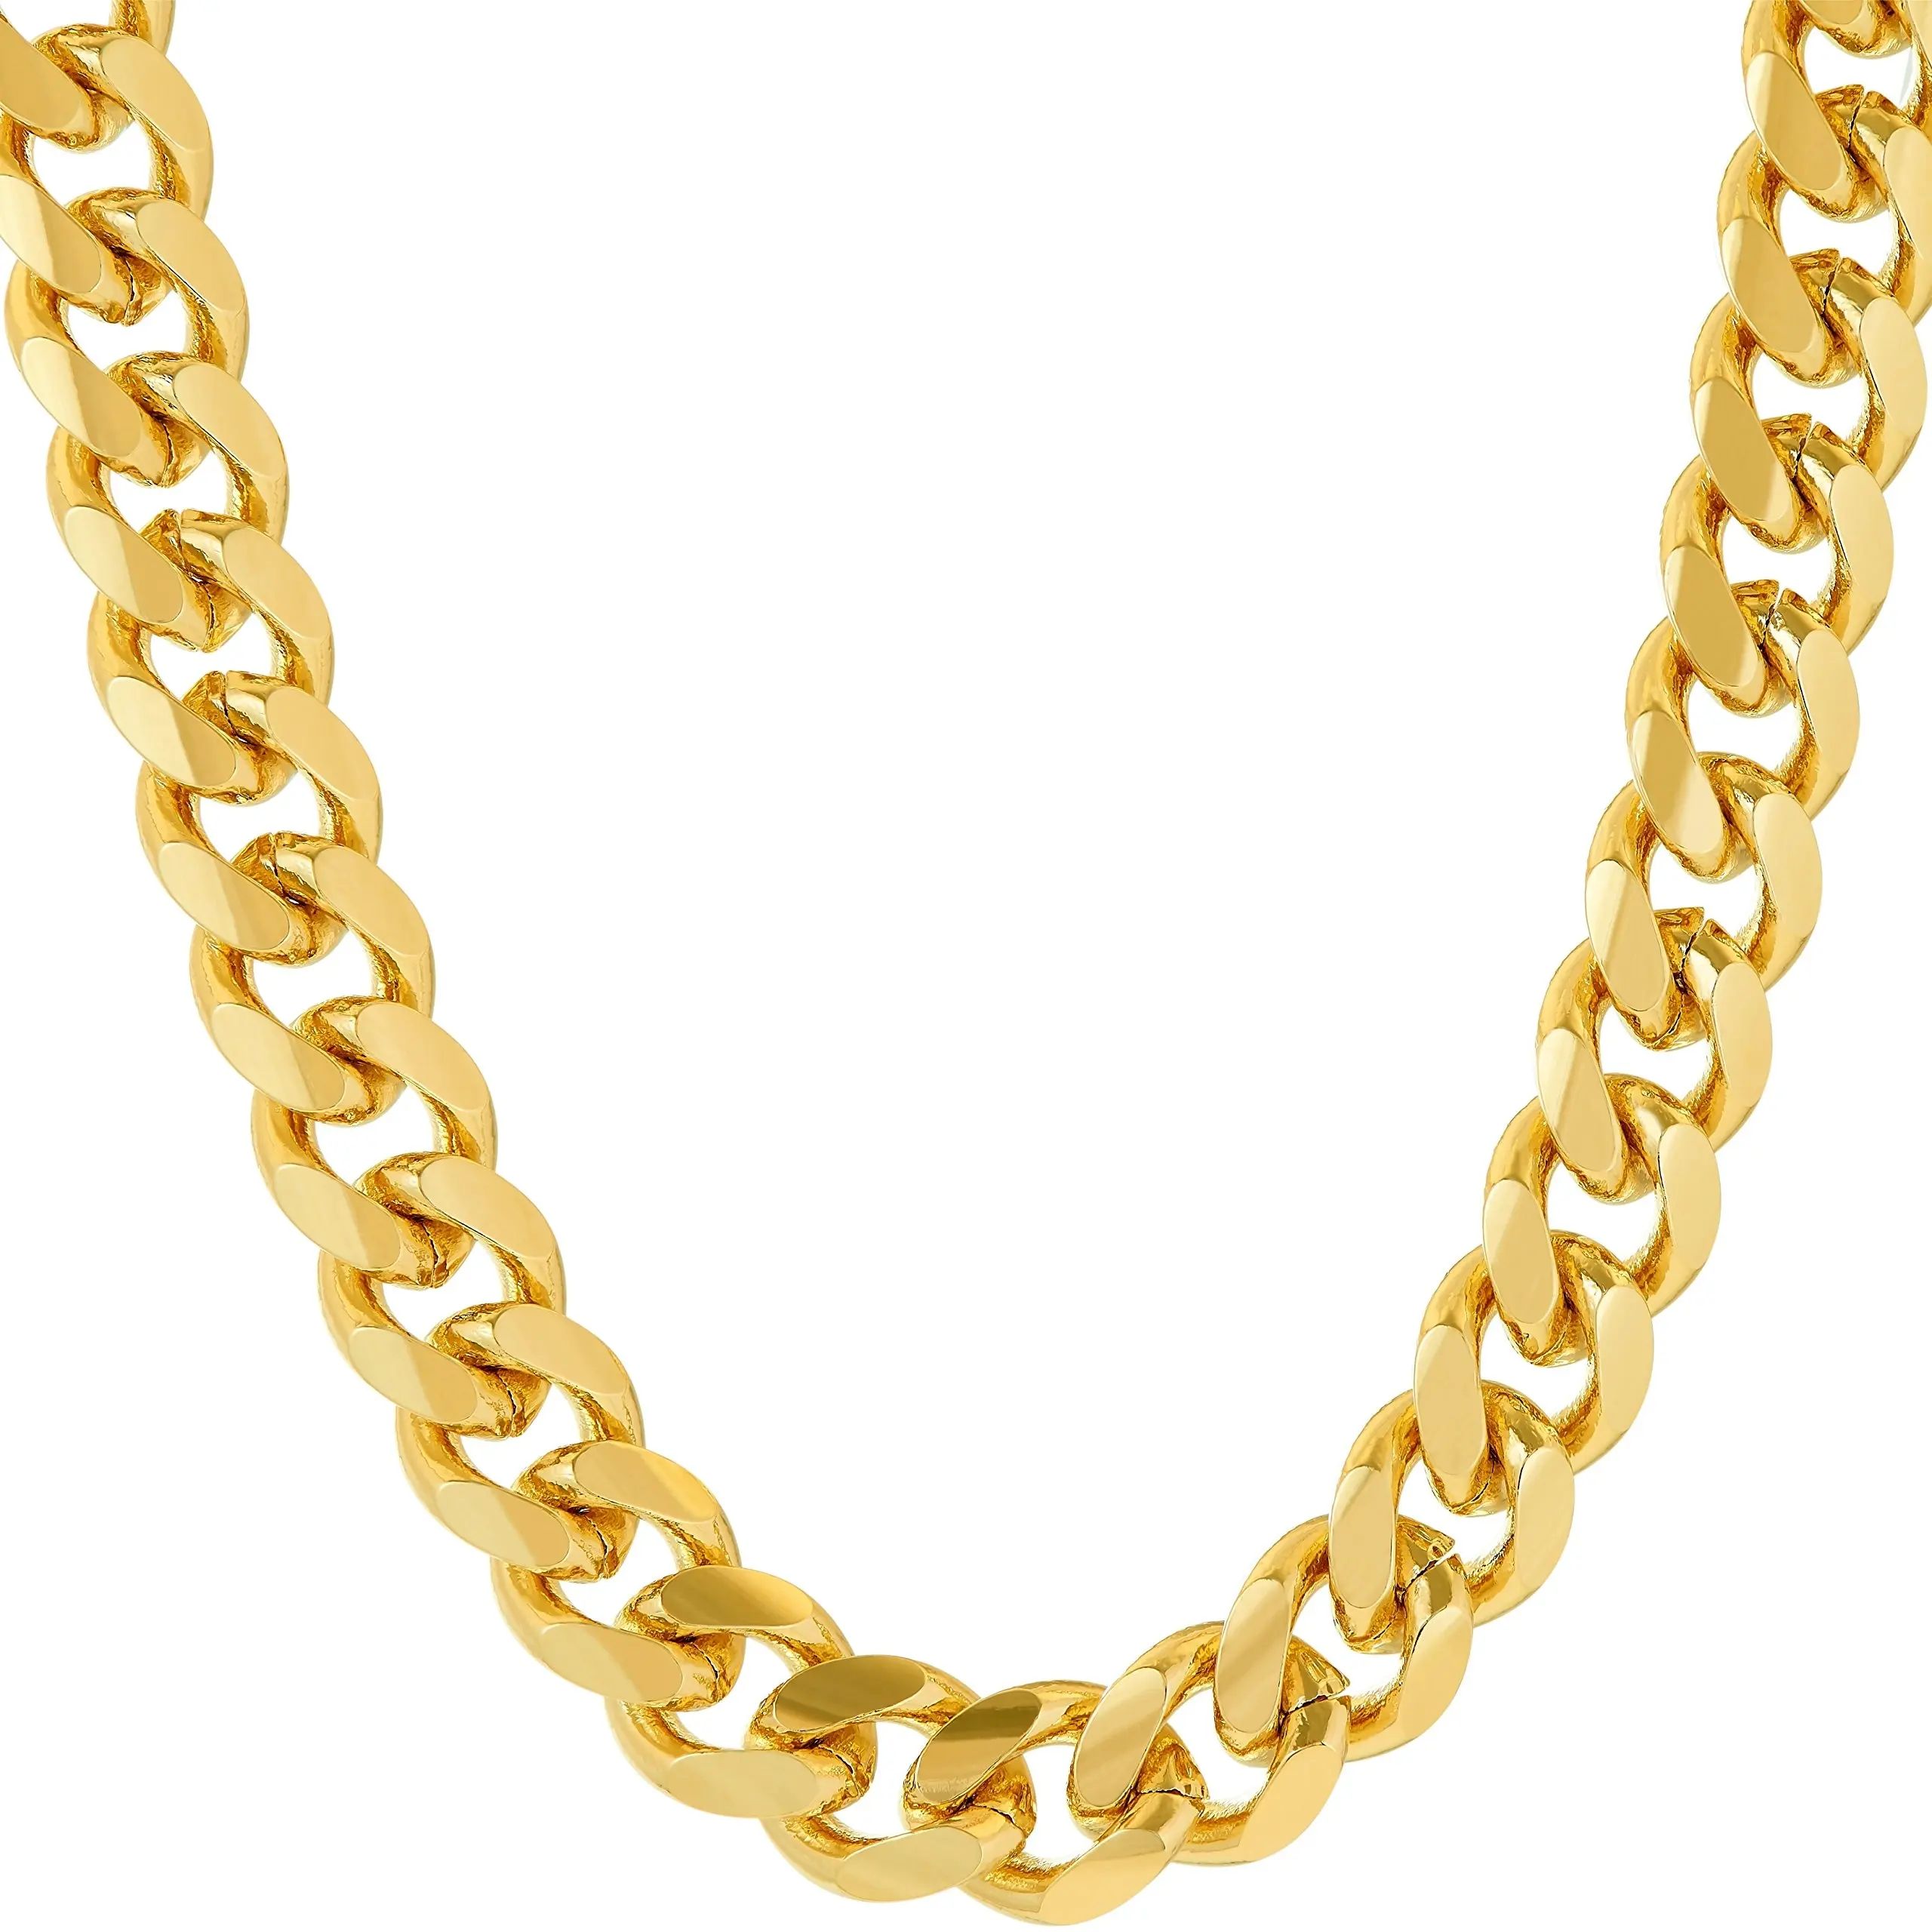 Firstmadam Hip Hop Fashion Jewelry Wholesale 18K Solid Gold Classic Miami Men Necklaces Cuban Link Chain